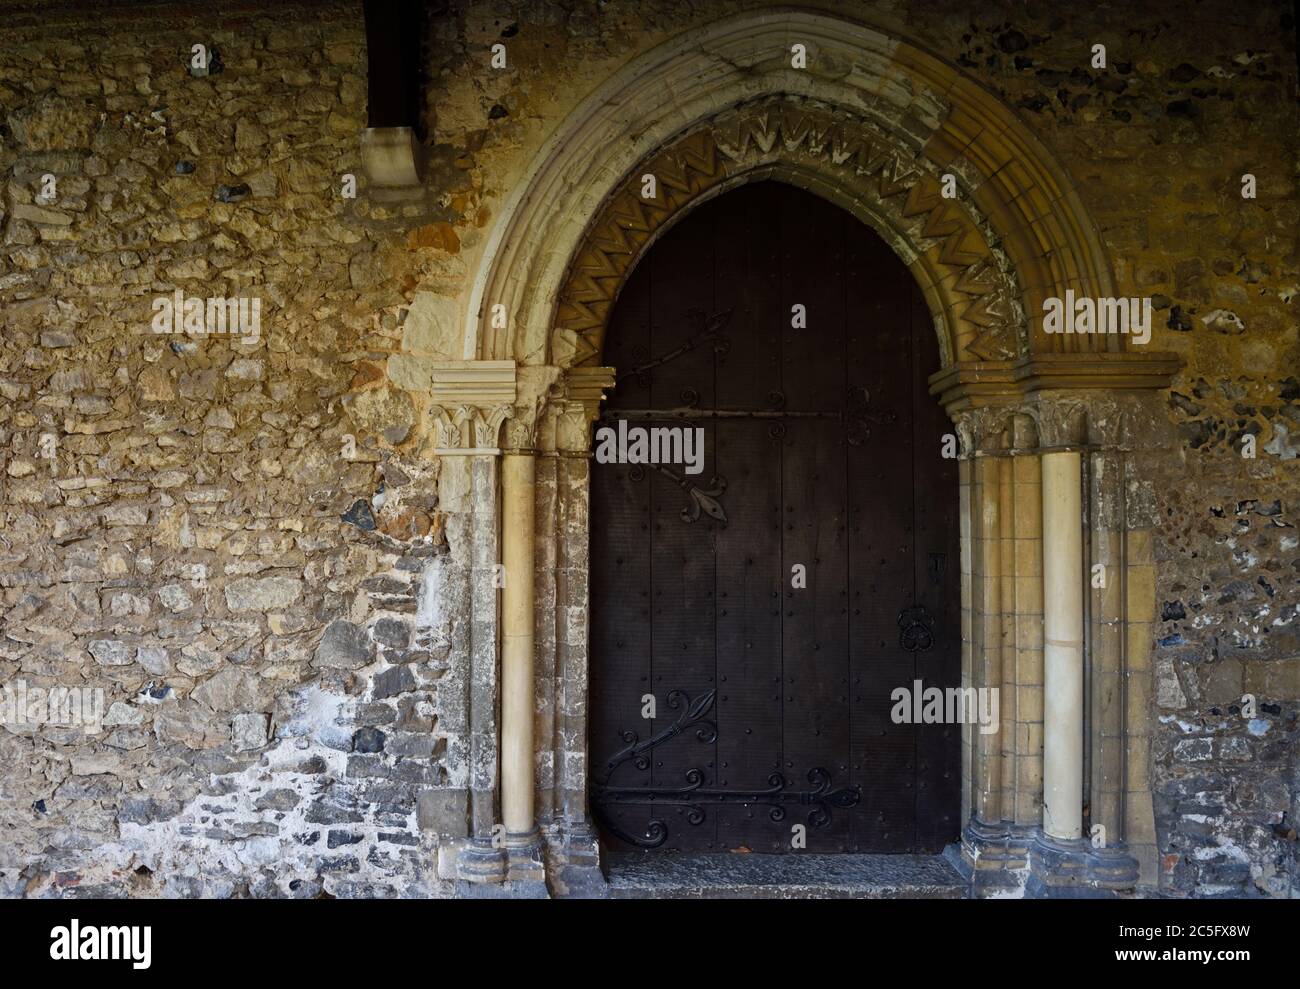 Old doorway in the north wall of the refectory at Prittlewell Priory, Prittlewell, Southend, Essex, once under the Cluniac order of St Pancras Lewes. Stock Photo